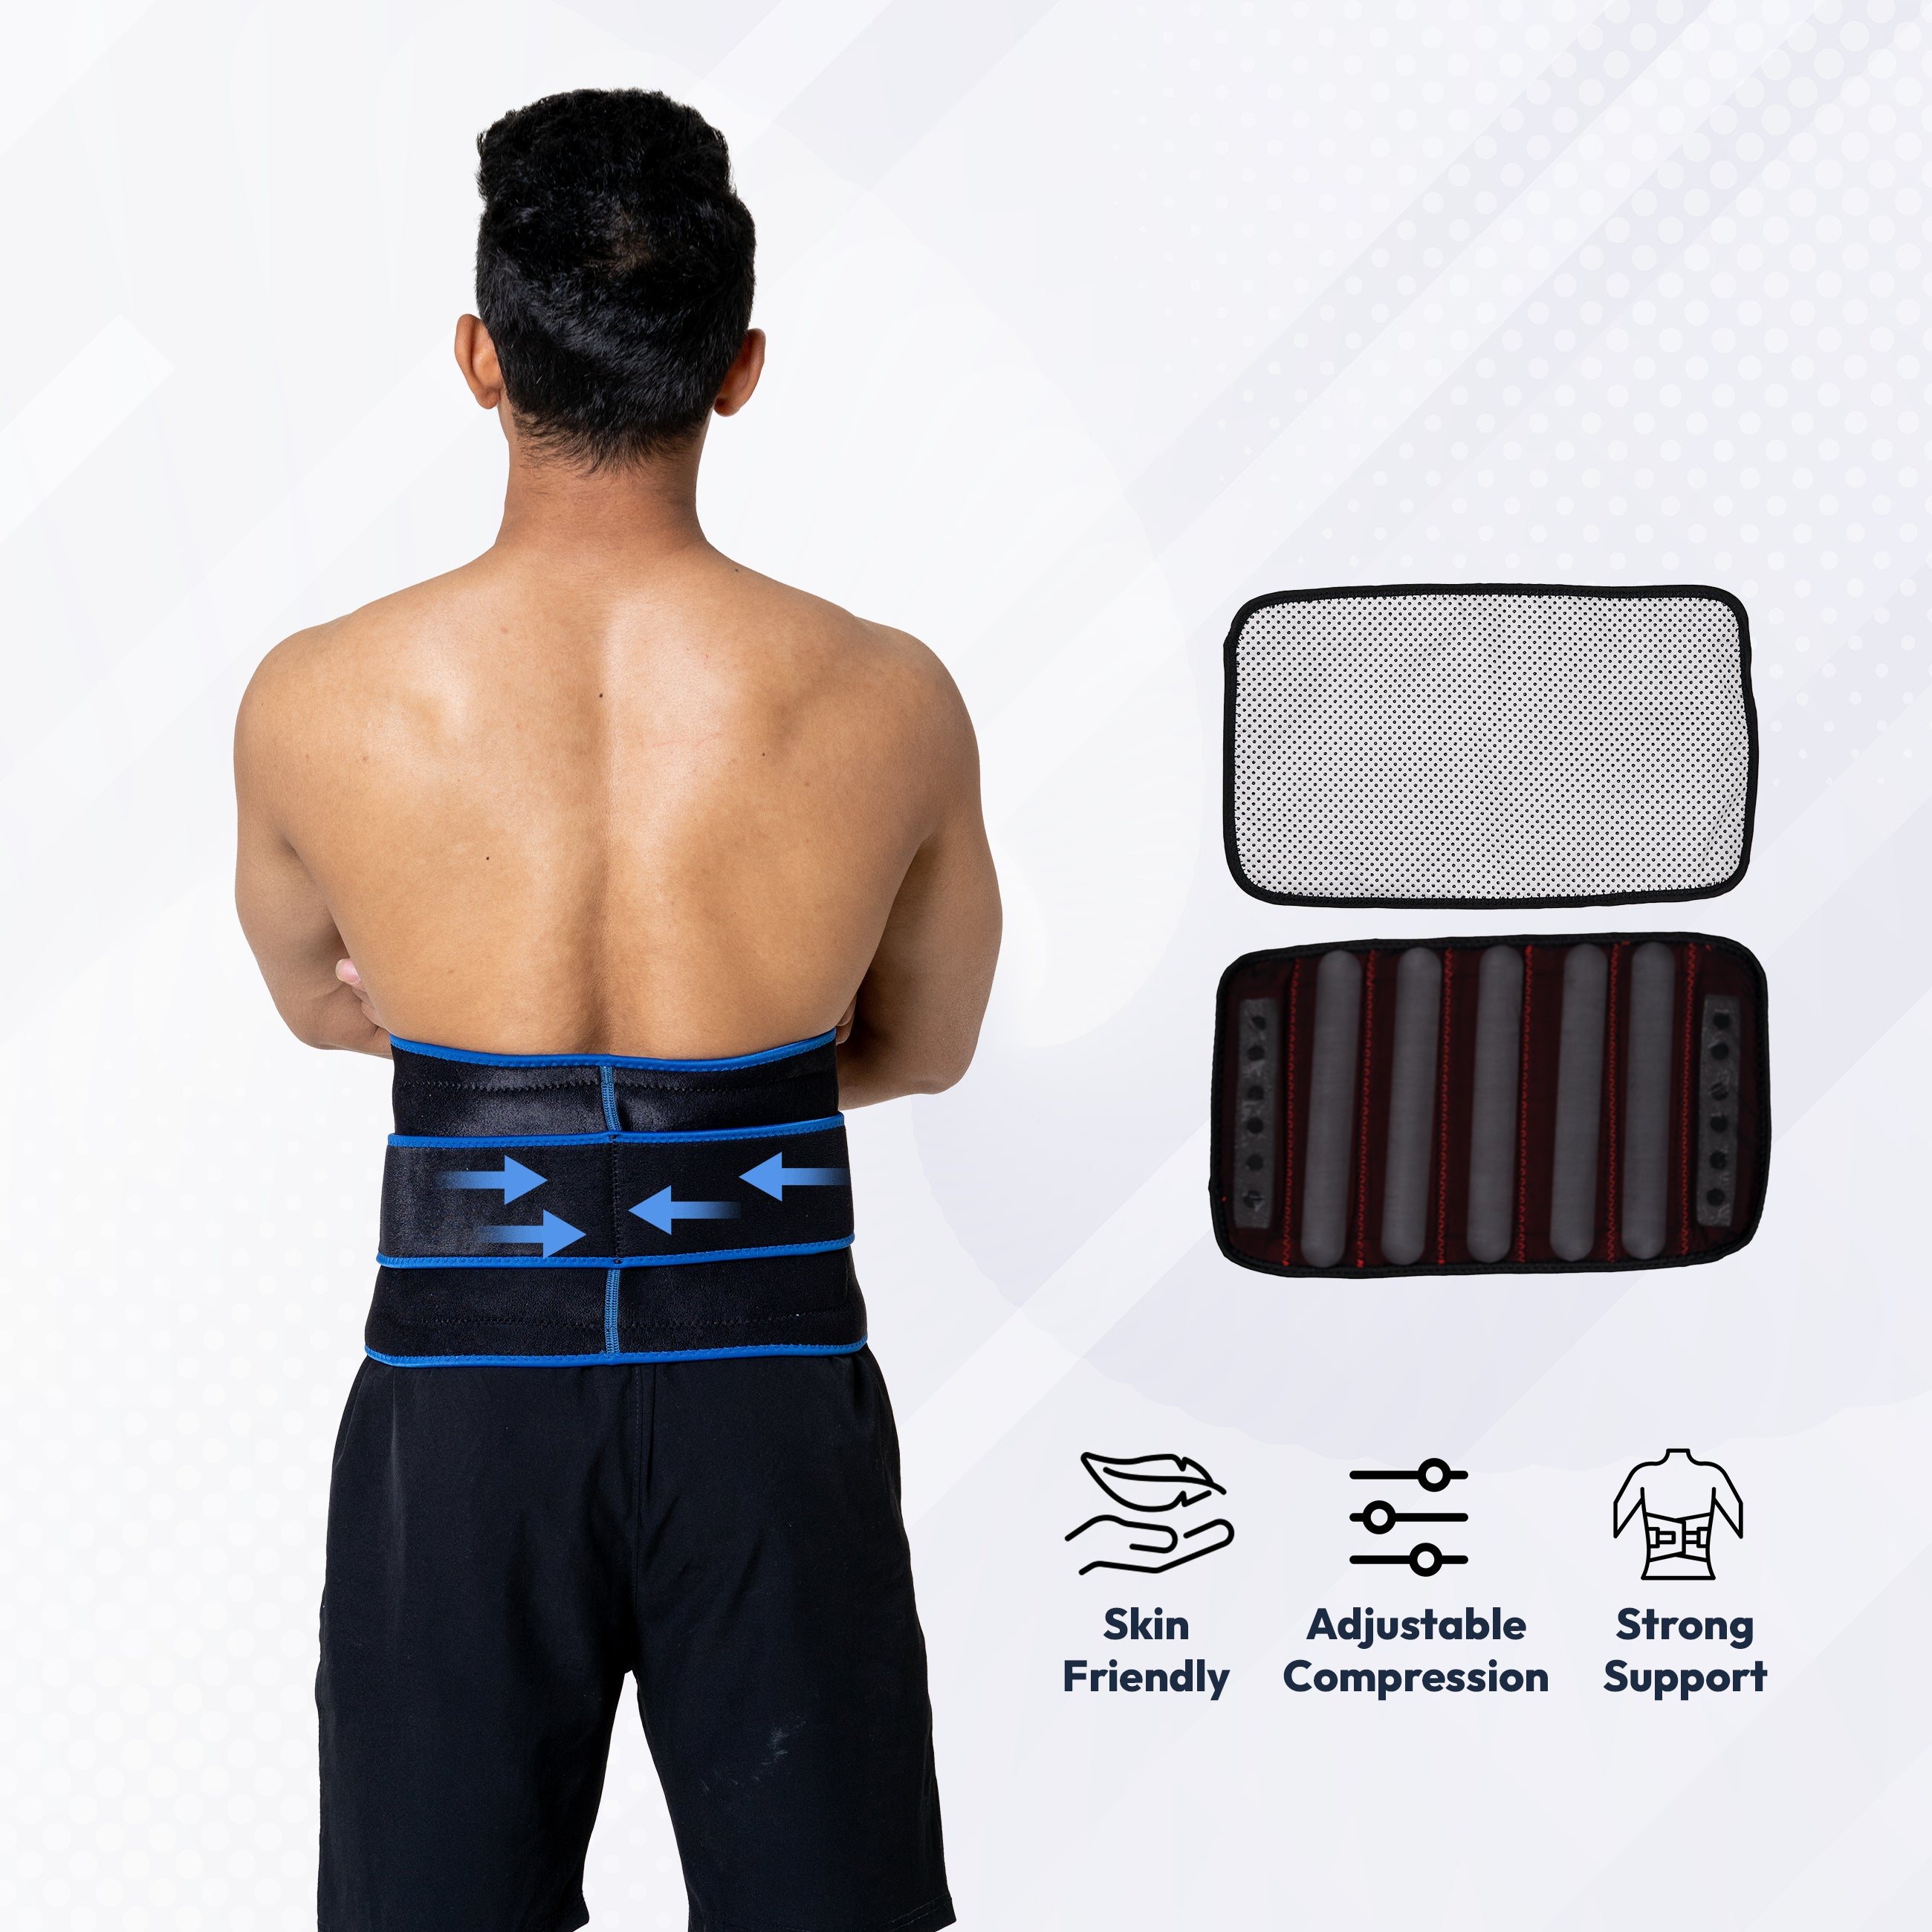 I5Joints- Magnetic Far Infrared Back Support with Stays(Back Support With Stays belt for Lower Back Pain Relief, Better Posture and Pain Relief and Added Gel Padding for Comfort)